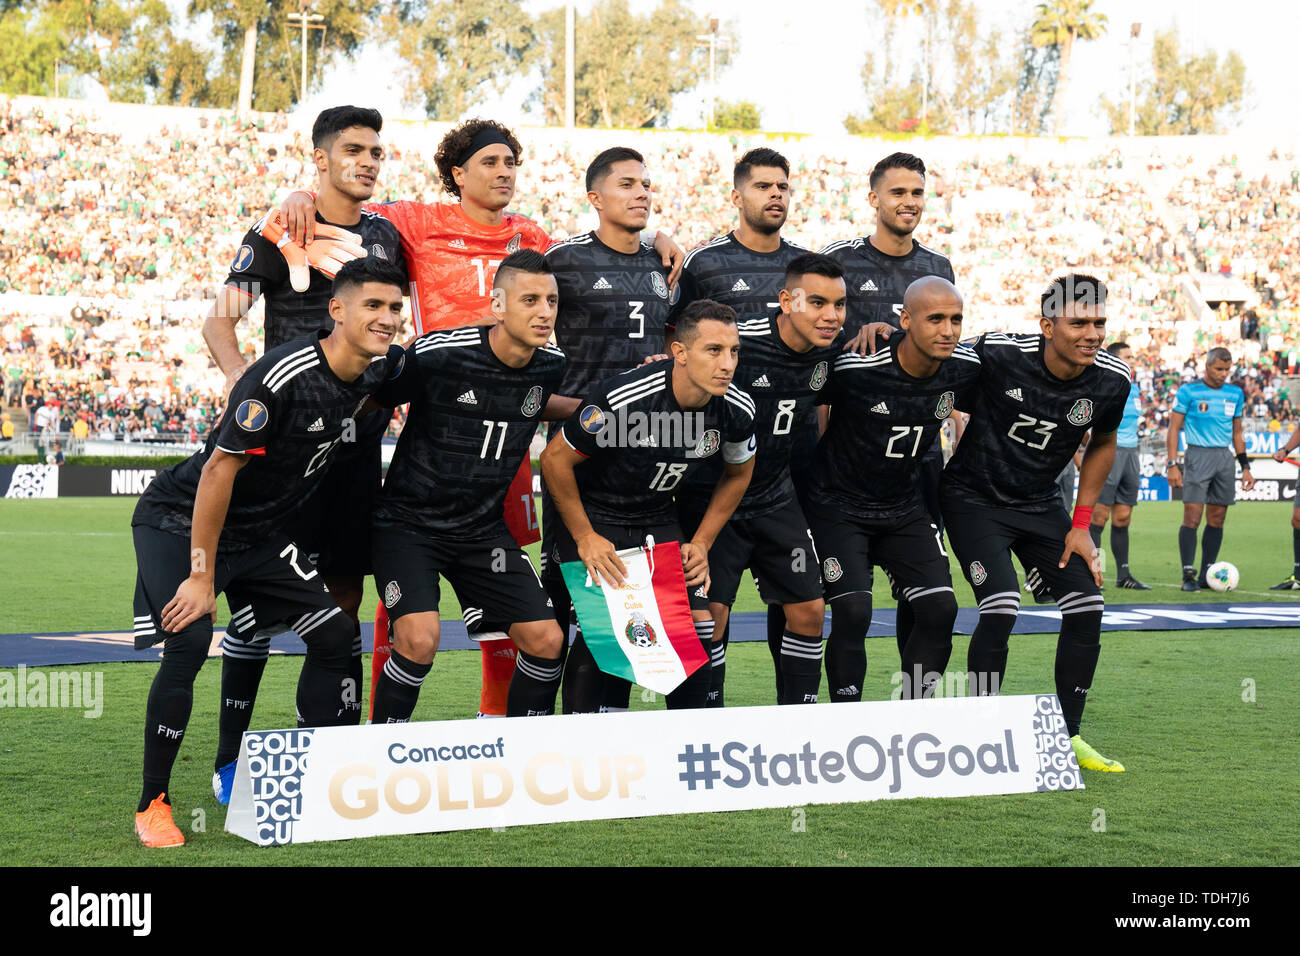 Los Angeles, USA. 15th June, 2019. Players of Mexico line up before the 2019 Confederation of North, Central American and Caribbean Association Football (CONCACAF) Gold Cup between Mexico and Cuba in Pasadena, Los Angeles, the United States, June 15, 2019. Credit: Qian Weizhong/Xinhua/Alamy Live News Stock Photo